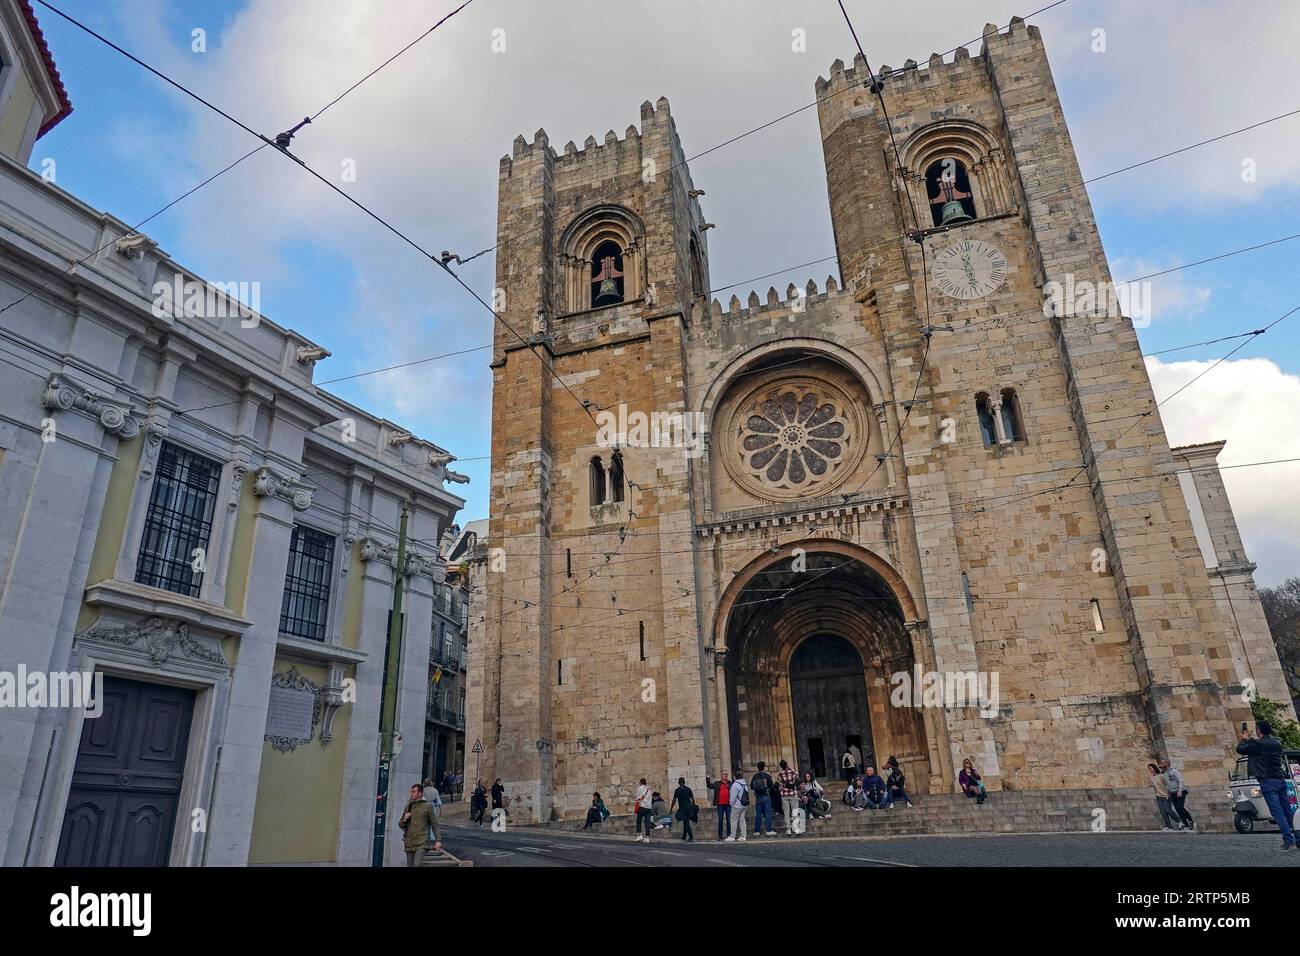 Portugal, Lisbon, The Cathedral of Saint Mary Major often called Lisbon Cathedral or simply the Se (Se de Lisboa), is a Roman Catholic cathedral built Stock Photo